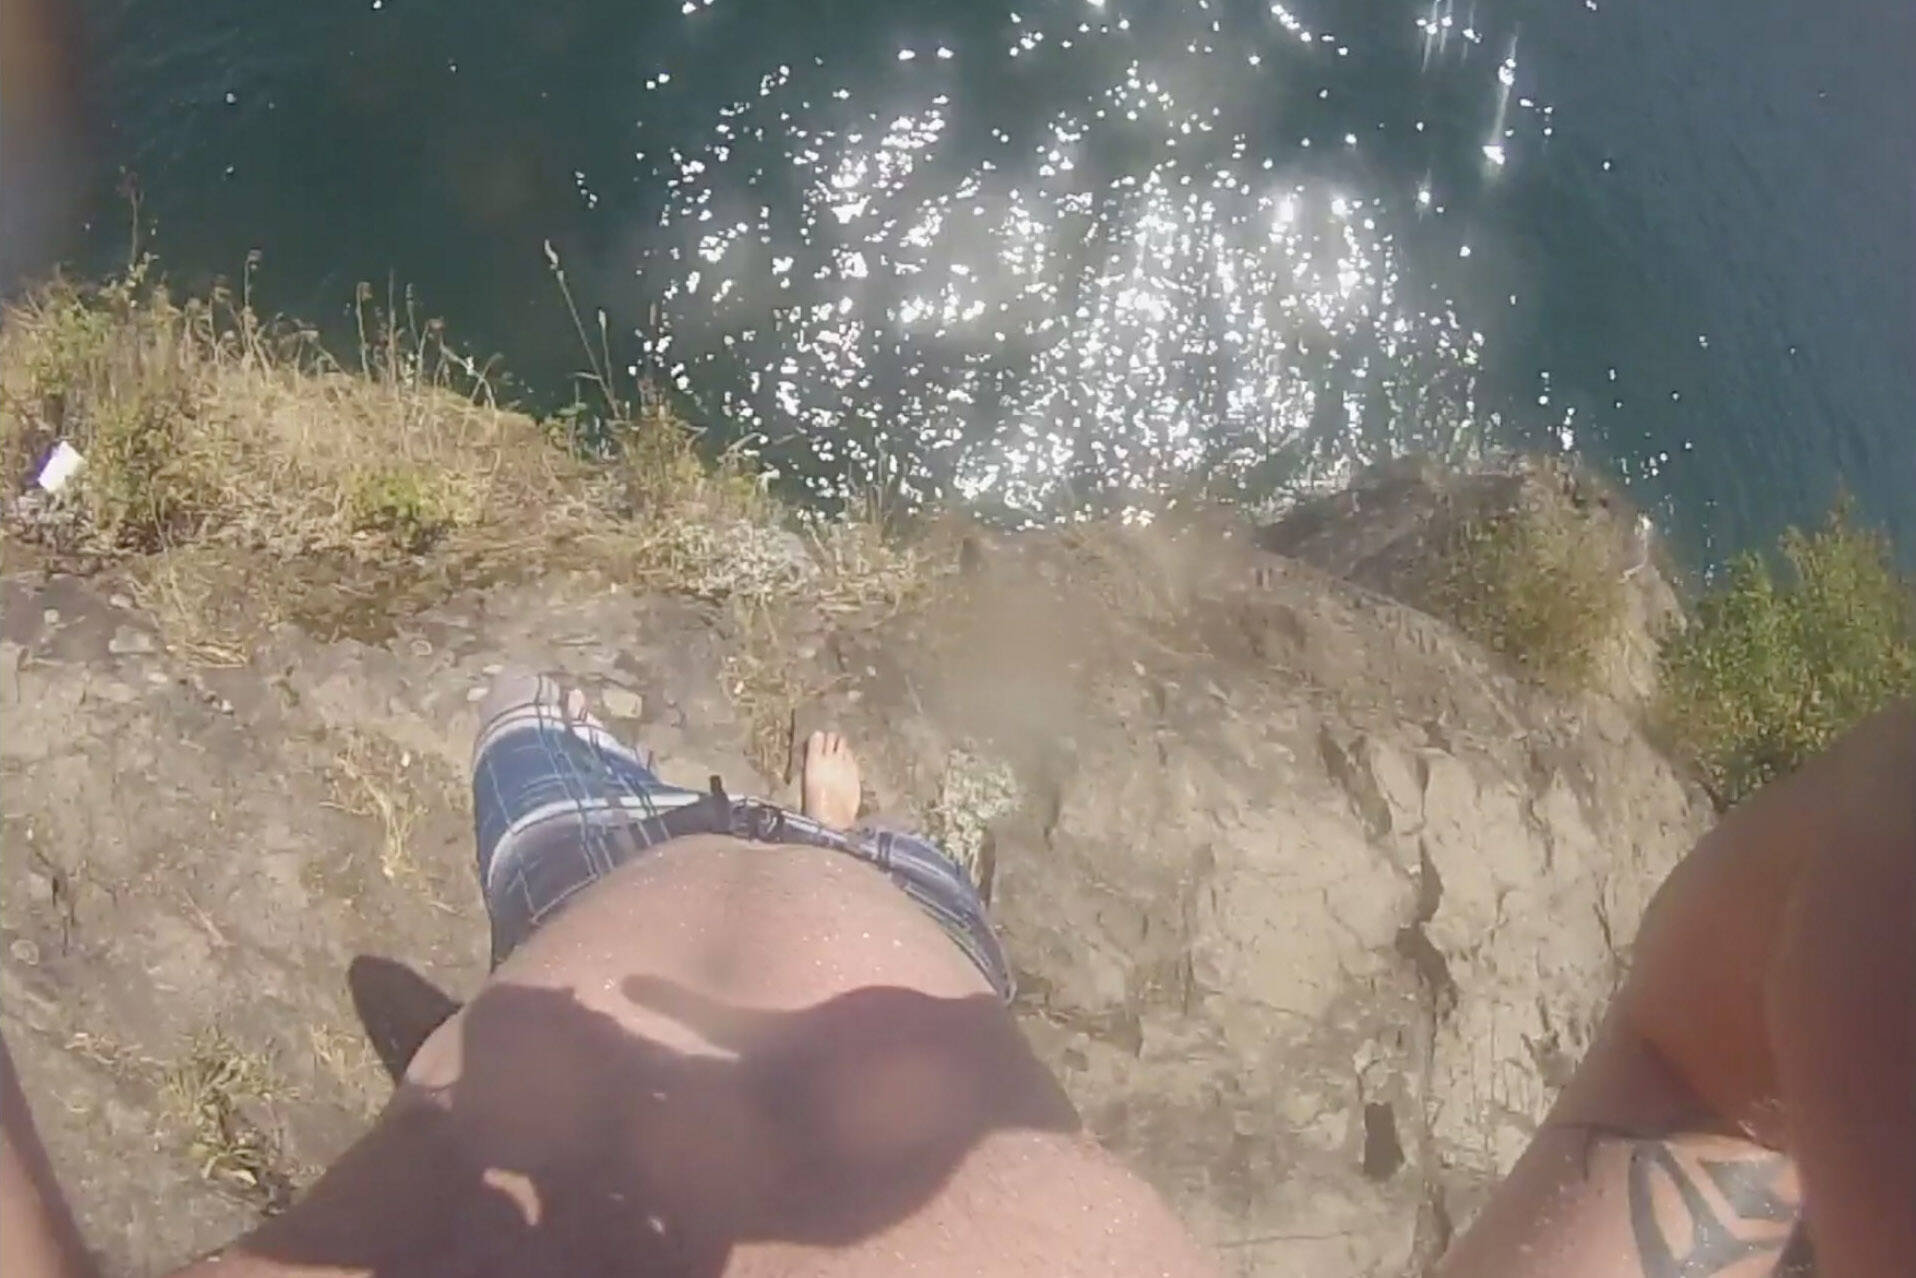 Terry Brookes was cliff jumping when he lost his GoPro camera at Cultus Lake in 2012. It was recovered 11 years later by Clay Helkenberg using an underwater drone on Aug. 21, 2023. (Screenshot/Terry Brookes)